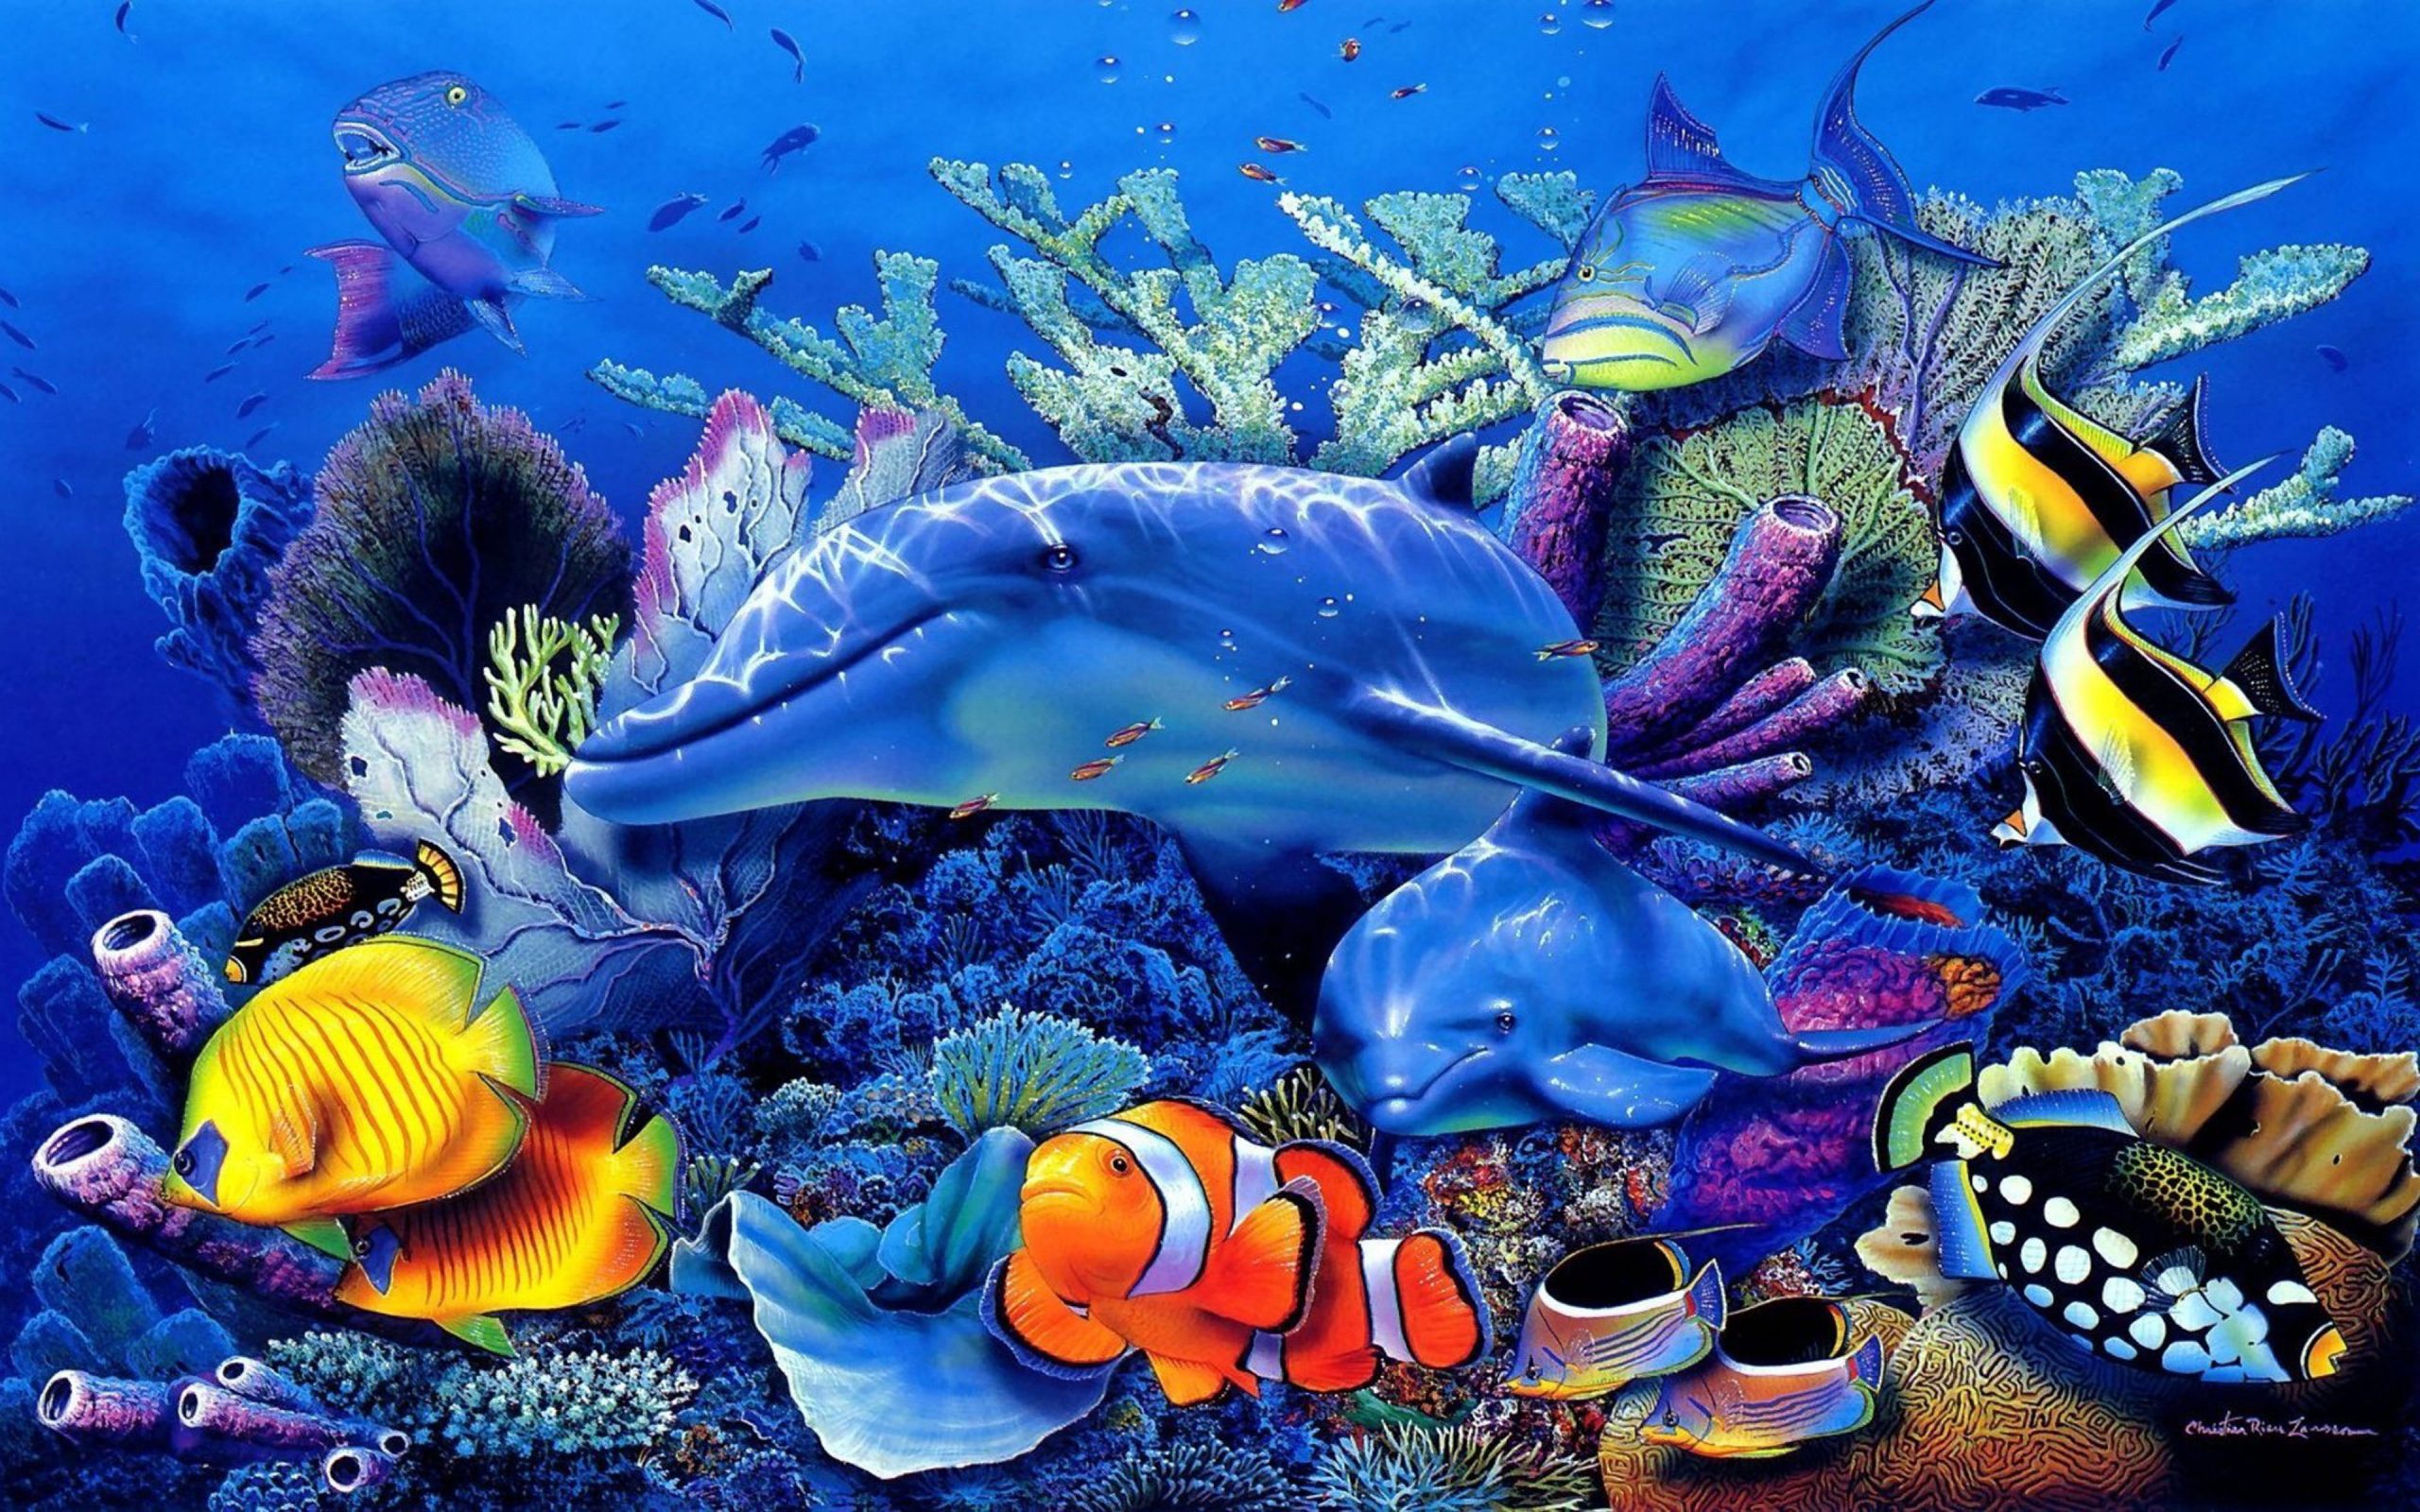 Ocean Underwater World Dolphin Coral Exotic Tropical Fish wallpaper, Wallpapers For Cell Phone And Laptop